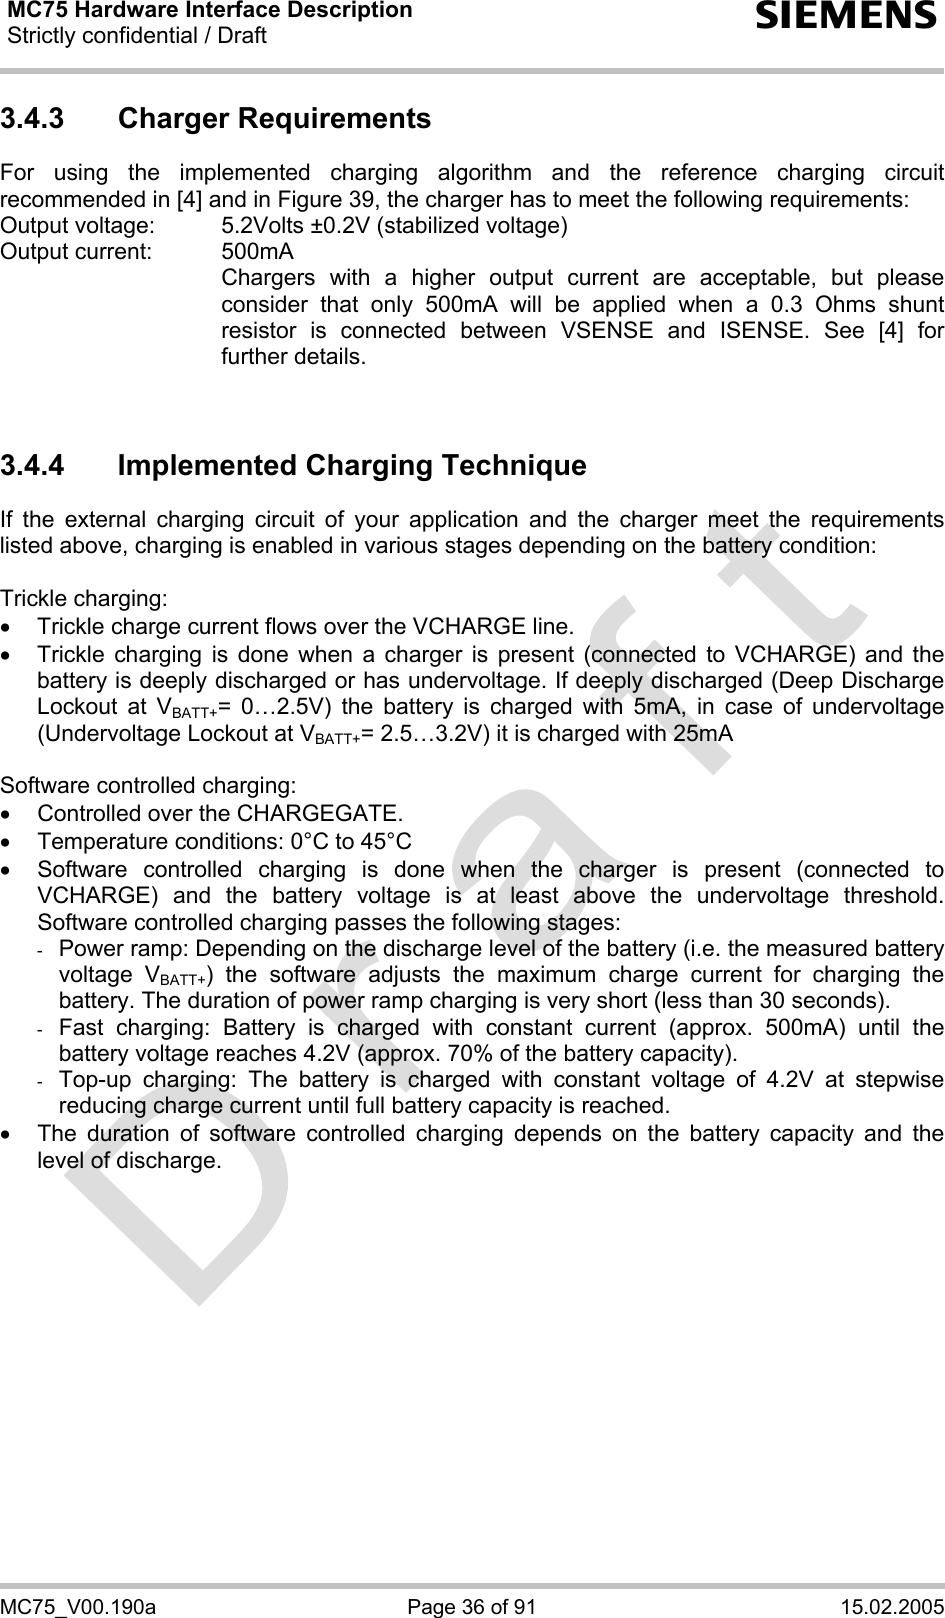 MC75 Hardware Interface Description Strictly confidential / Draft  s MC75_V00.190a  Page 36 of 91  15.02.2005 3.4.3 Charger Requirements For using the implemented charging algorithm and the reference charging circuit recommended in [4] and in Figure 39, the charger has to meet the following requirements: Output voltage:   5.2Volts ±0.2V (stabilized voltage) Output current:   500mA     Chargers with a higher output current are acceptable, but please consider that only 500mA will be applied when a 0.3 Ohms shunt resistor is connected between VSENSE and ISENSE. See [4] for further details.   3.4.4  Implemented Charging Technique If the external charging circuit of your application and the charger meet the requirements listed above, charging is enabled in various stages depending on the battery condition:   Trickle charging: •  Trickle charge current flows over the VCHARGE line. •  Trickle charging is done when a charger is present (connected to VCHARGE) and the battery is deeply discharged or has undervoltage. If deeply discharged (Deep Discharge Lockout at VBATT+= 0…2.5V) the battery is charged with 5mA, in case of undervoltage (Undervoltage Lockout at VBATT+= 2.5…3.2V) it is charged with 25mA  Software controlled charging: •  Controlled over the CHARGEGATE. •  Temperature conditions: 0°C to 45°C •  Software controlled charging is done when the charger is present (connected to VCHARGE) and the battery voltage is at least above the undervoltage threshold. Software controlled charging passes the following stages: -  Power ramp: Depending on the discharge level of the battery (i.e. the measured battery voltage VBATT+) the software adjusts the maximum charge current for charging the battery. The duration of power ramp charging is very short (less than 30 seconds). -  Fast charging: Battery is charged with constant current (approx. 500mA) until the battery voltage reaches 4.2V (approx. 70% of the battery capacity).  -  Top-up charging: The battery is charged with constant voltage of 4.2V at stepwise reducing charge current until full battery capacity is reached.  •  The duration of software controlled charging depends on the battery capacity and the level of discharge.   